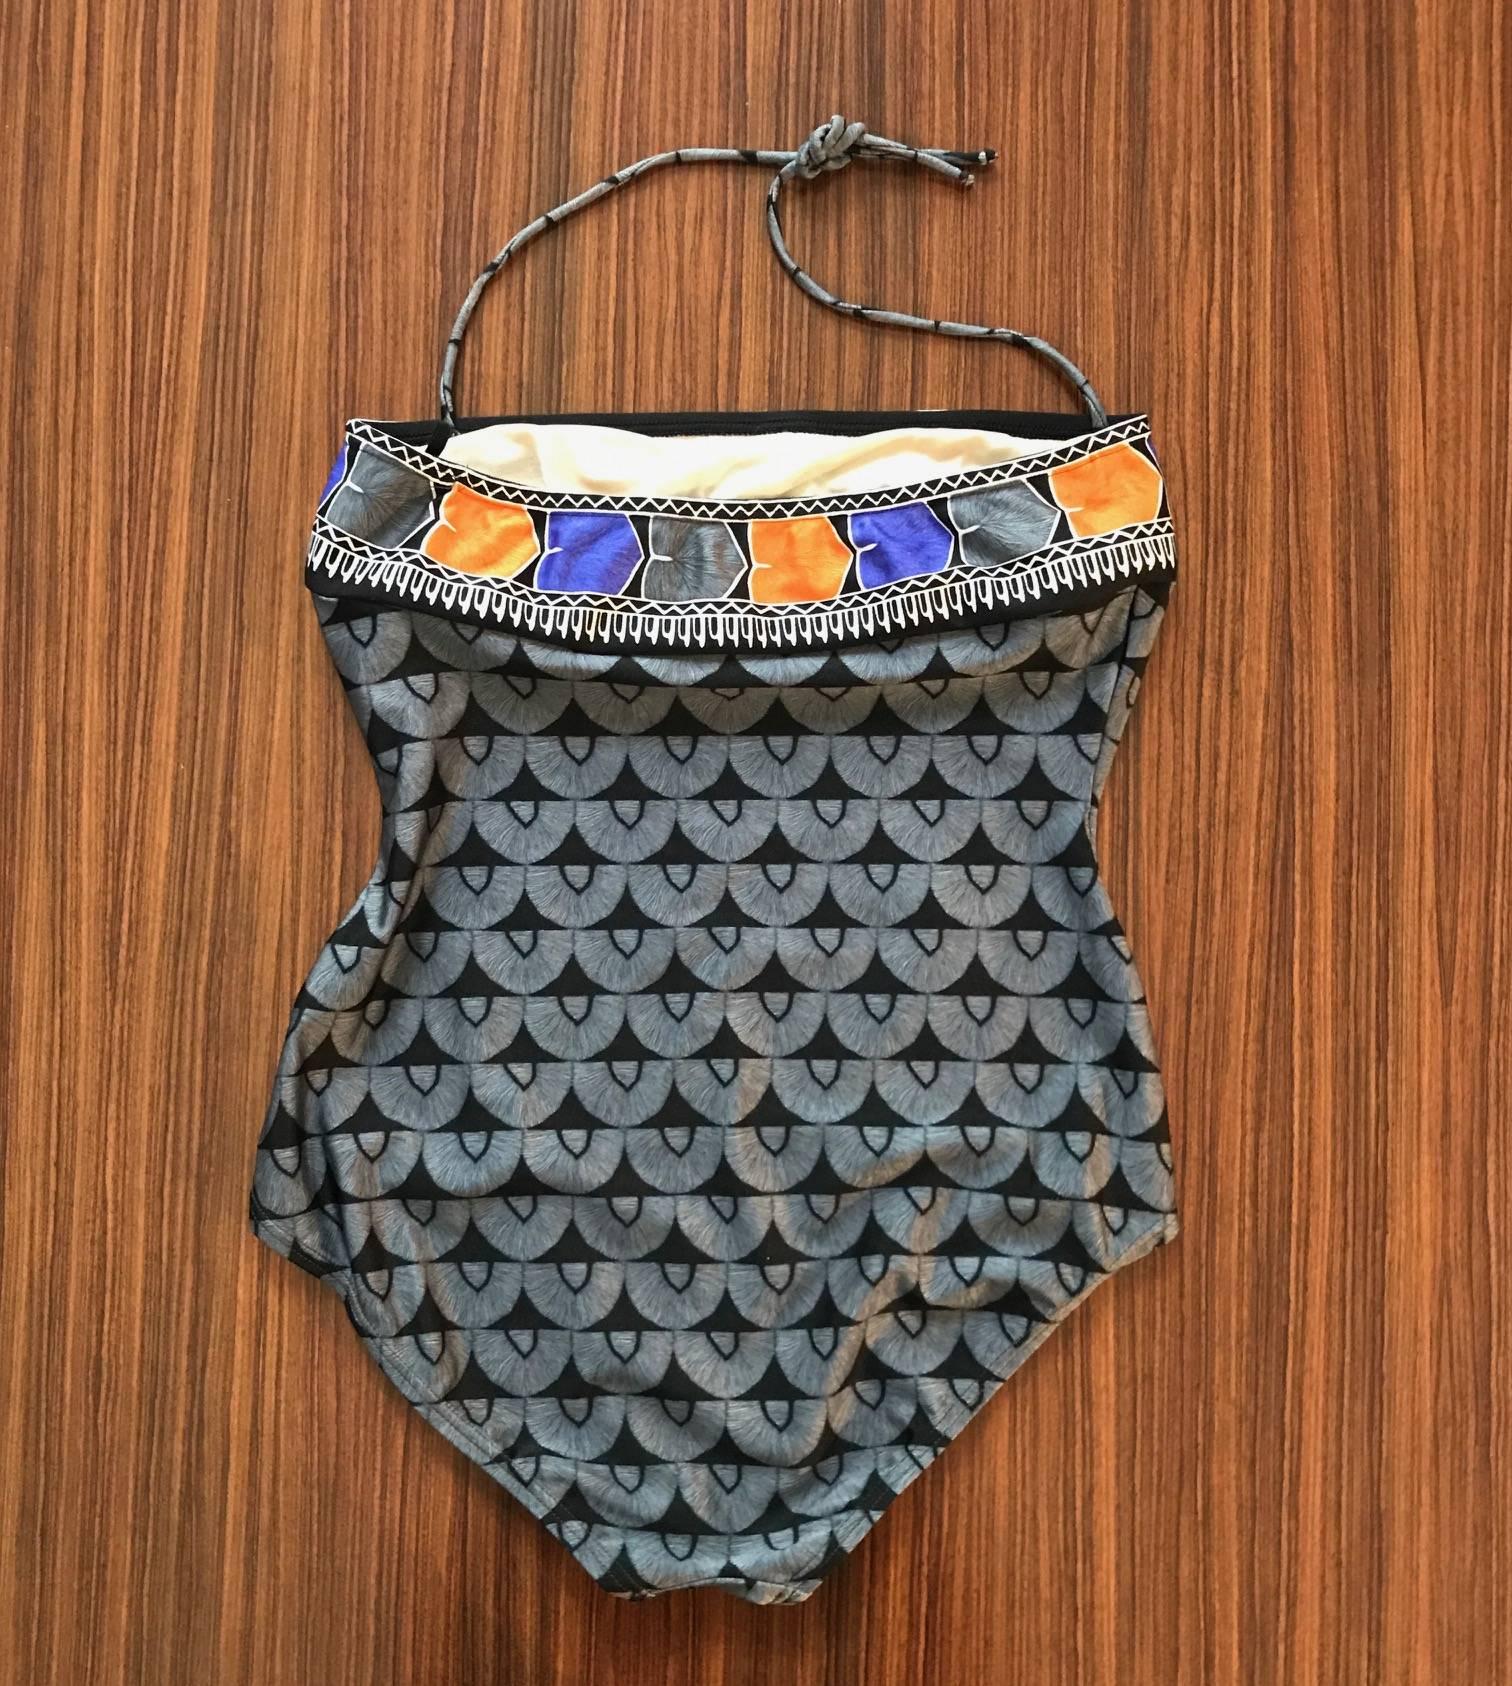 Yves Saint Laurent 1980s swimming suit with a grey and black pattern throughout and orange and blue pattern trim at top. Two strings at top tie in halter style around the neck. Lined at bust and bottom. 

80% nylon, 20% spandex.

Designed in France,